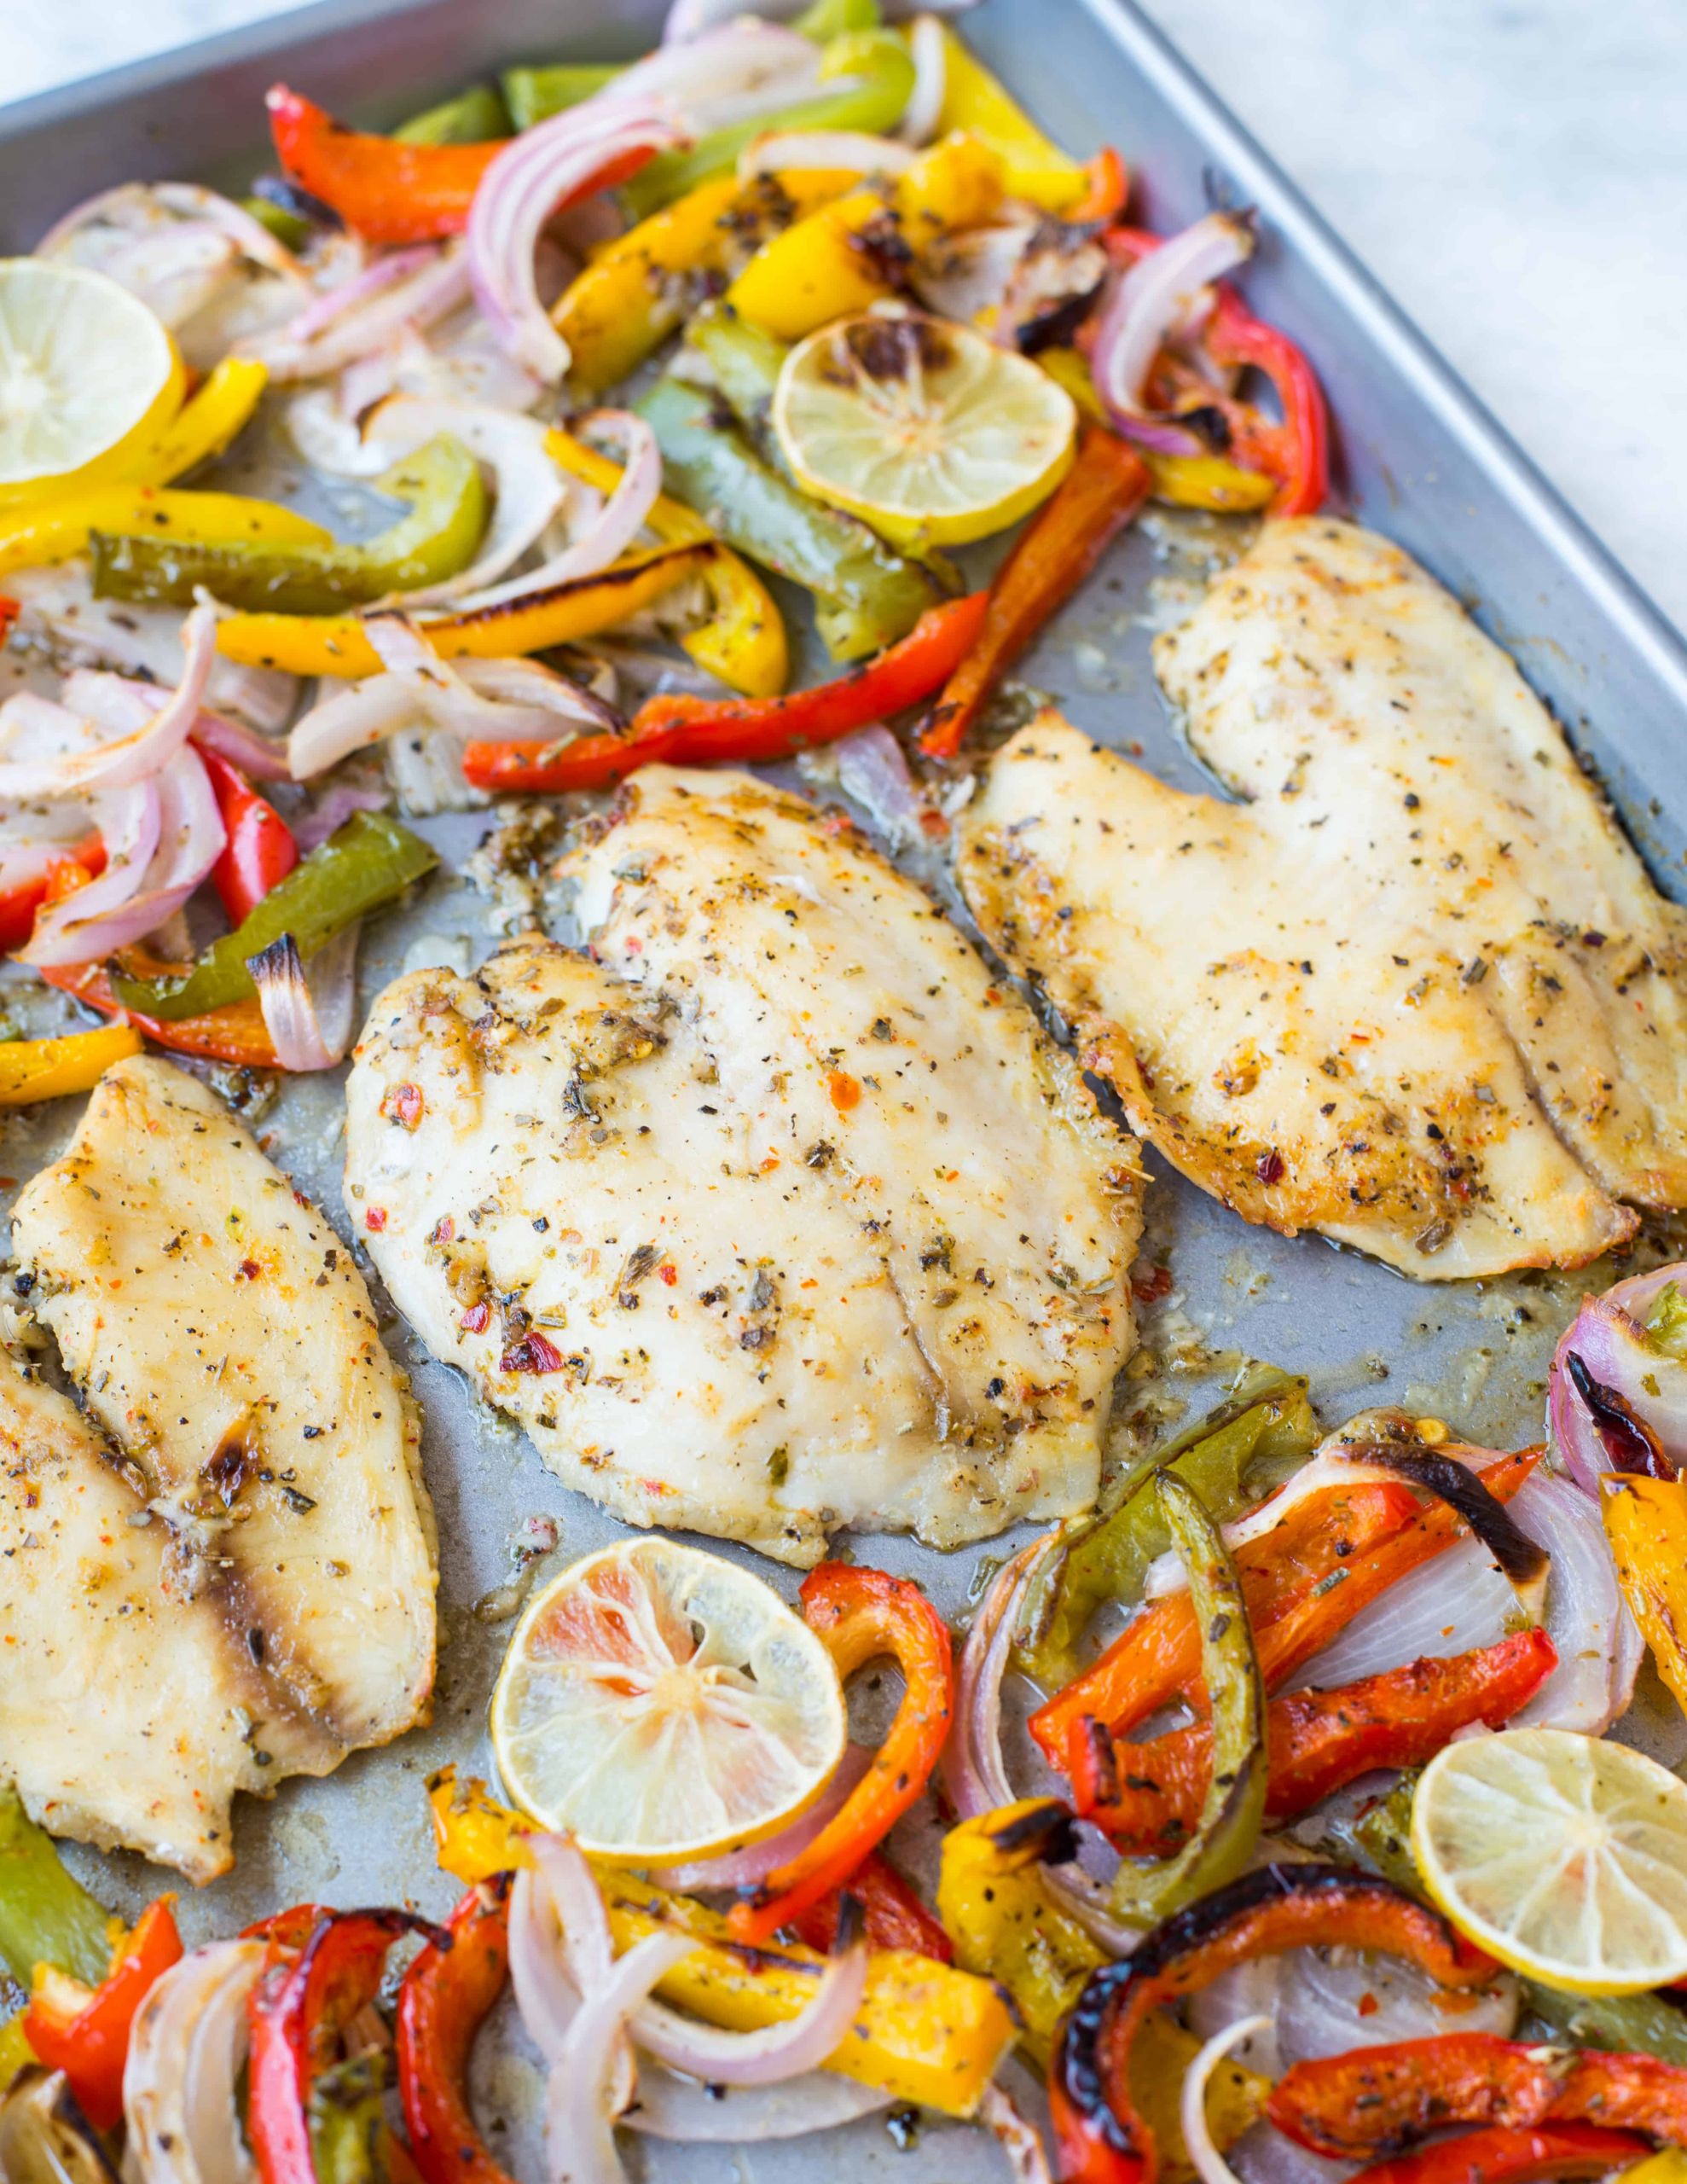 Recipes For Tilapia Fish In The Oven
 BAKED TILAPIA IN LEMON GARLIC SAUCE